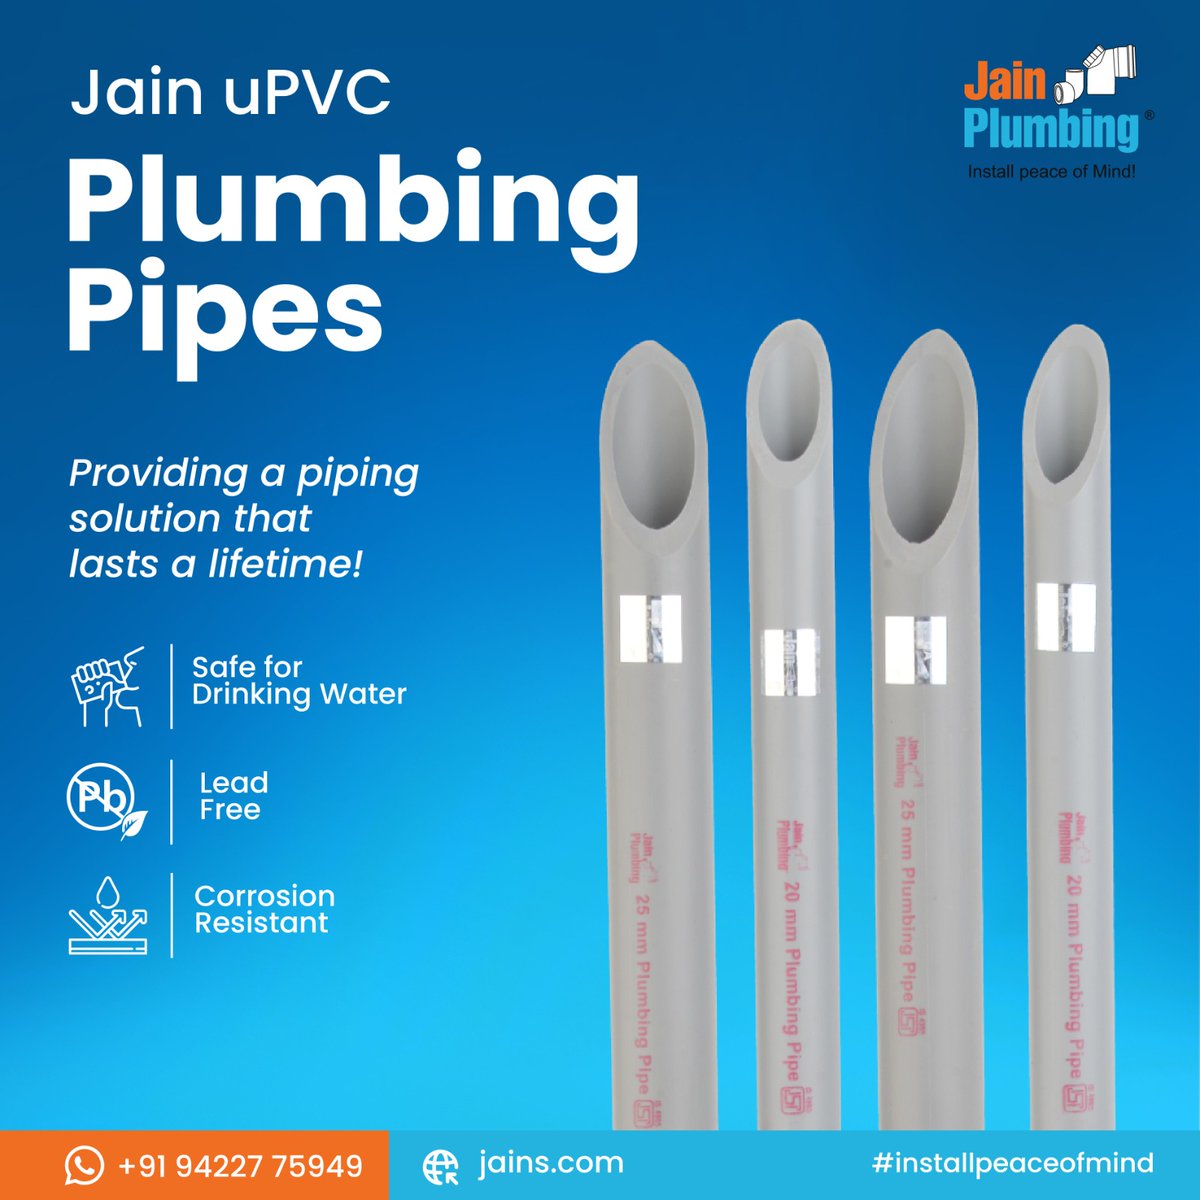 💪 Dive into the future of plumbing perfection with Jain Plumbing’s uPVC Plumbing Pipes! 🚰✨ Engineered for drinking water systems, our pipes redefine reliability and durability, ensuring lead-free peace of mind. 
#jainplumbing #leadfree #durable